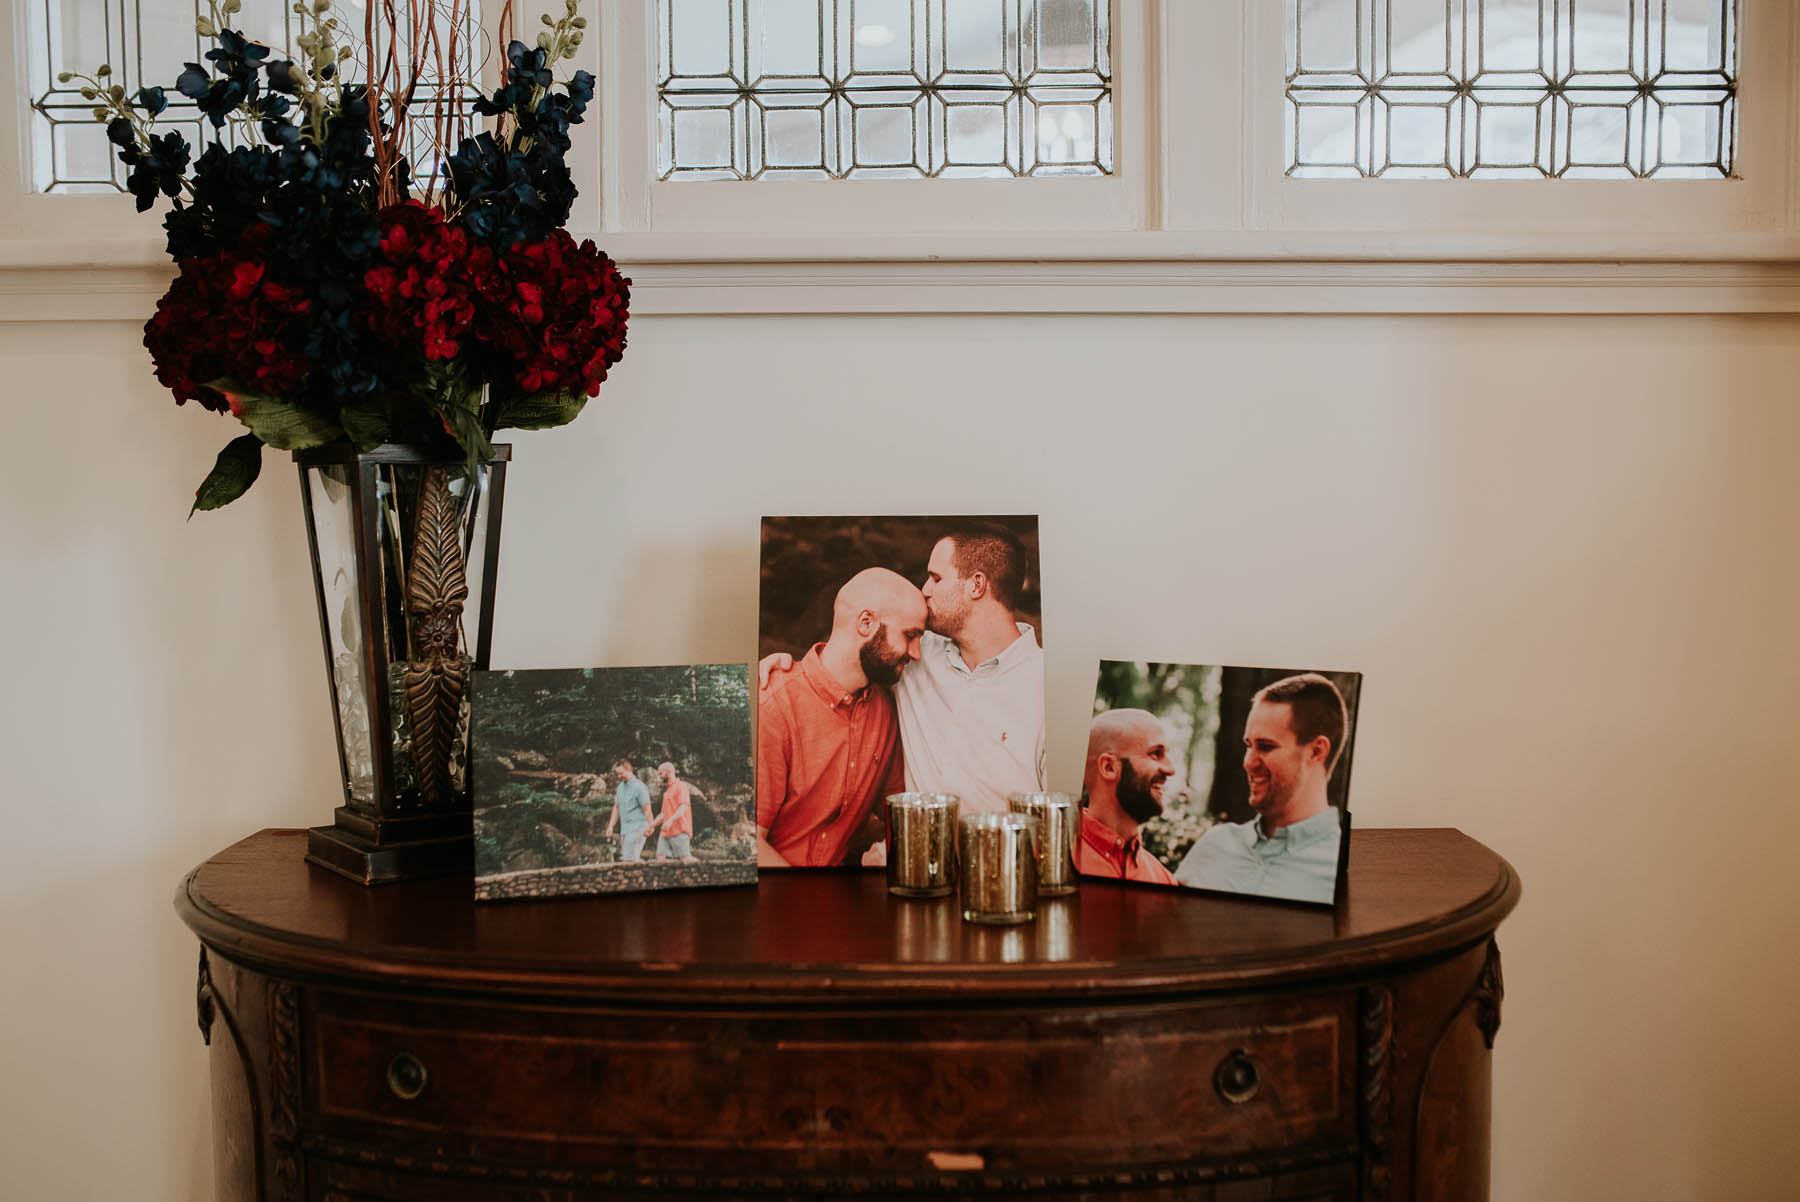 A bistro table with engagement photos on it and navy and burgundy flowers.